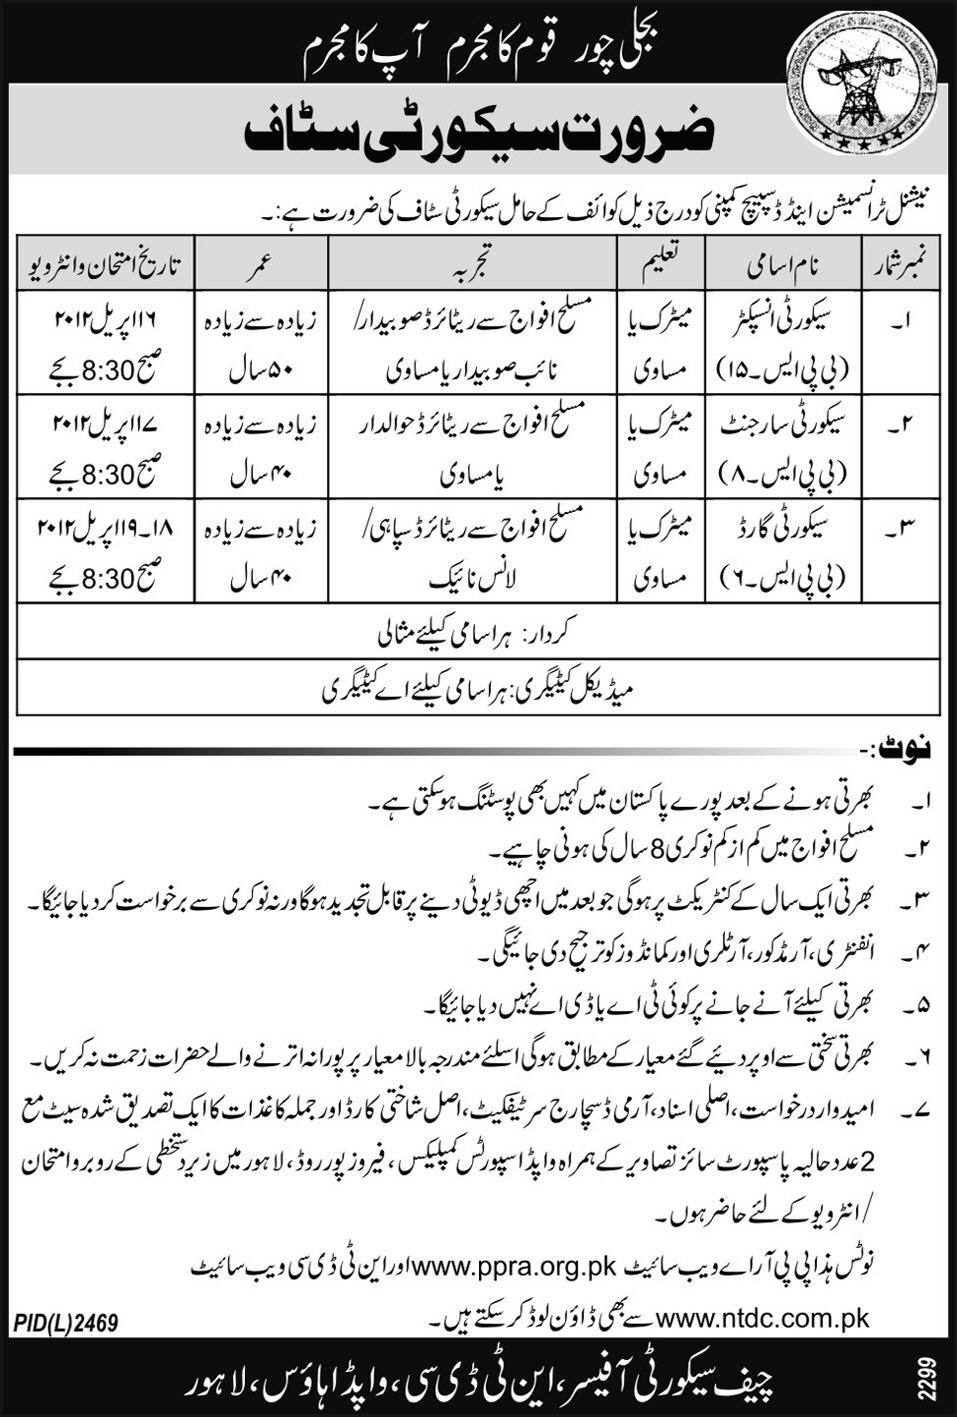 NTDC (National Transmission and Dispatch Company) Govt Jobs